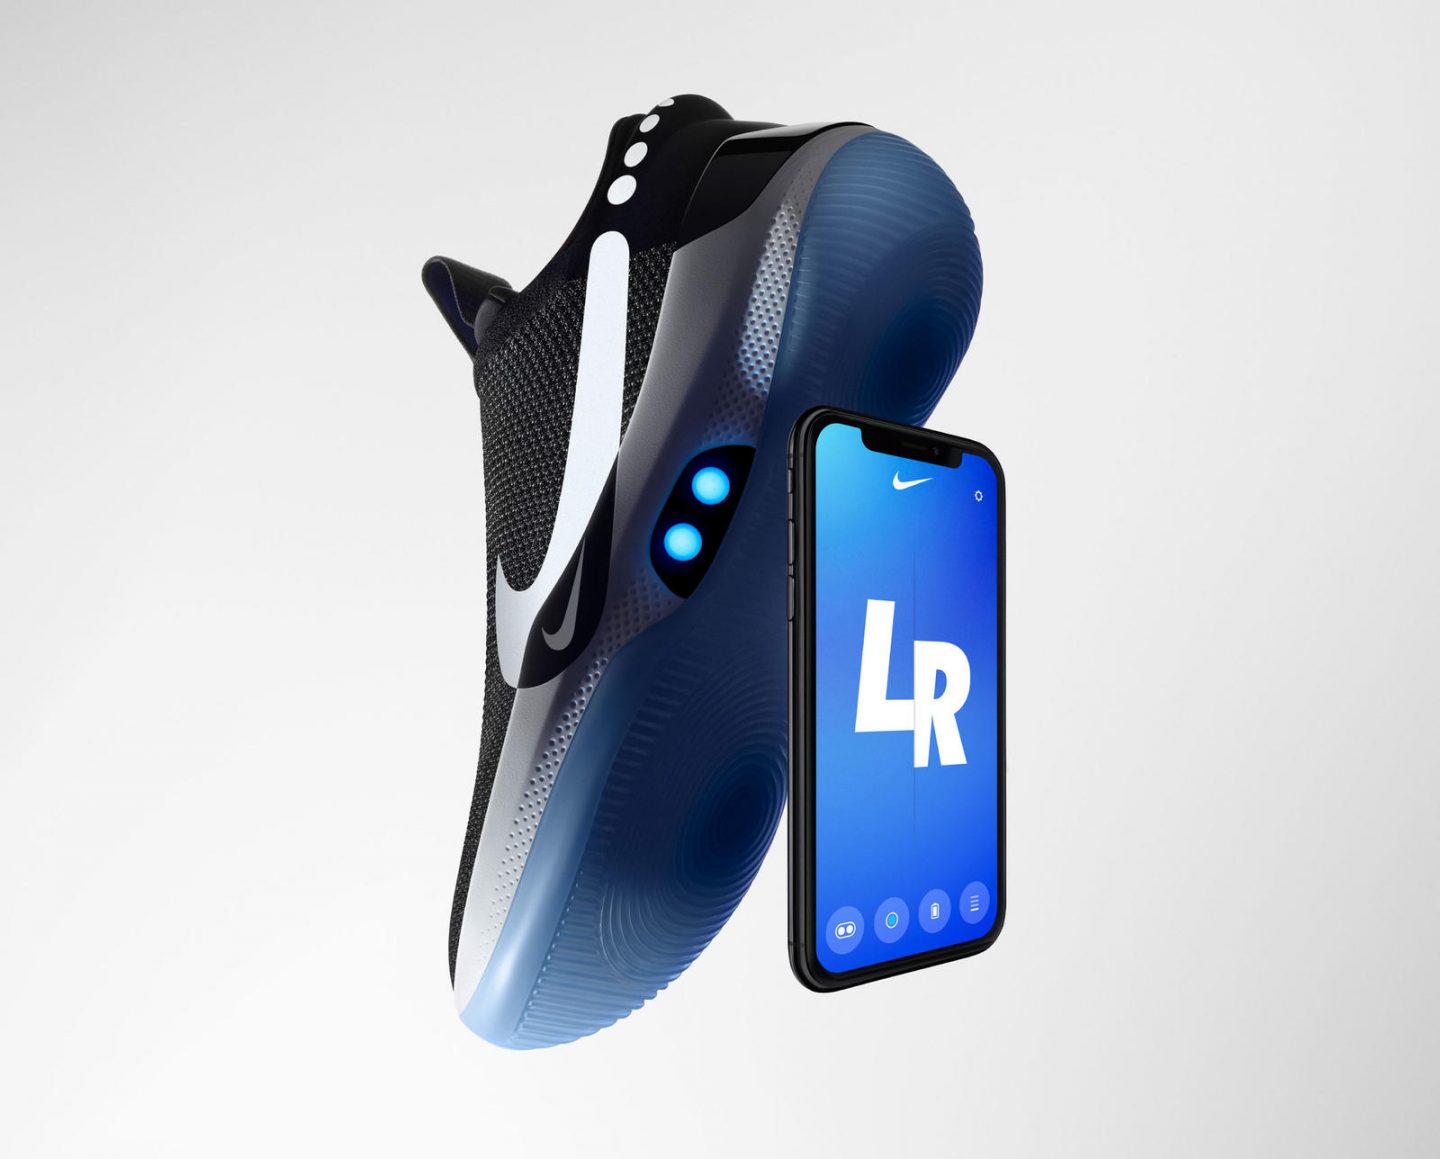 THE NIKE ADAPT BB BRINGS POWER-LACING TO REALITY